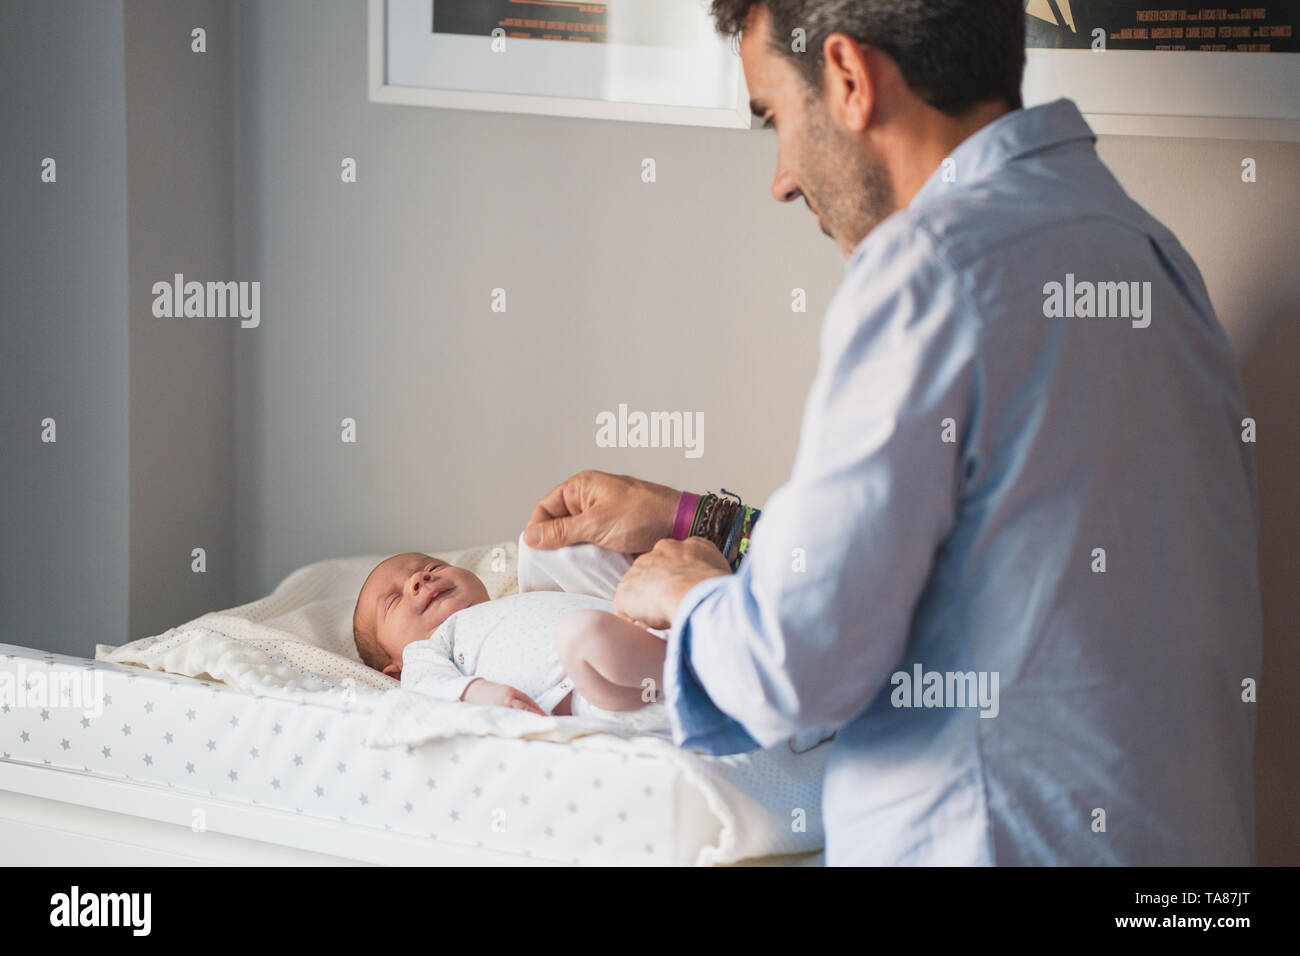 New father changing the diaper to his cute newborn. Baby expresses calm and peace. Social and Gender equality. Family, new life, childhood, fatherhood Stock Photo